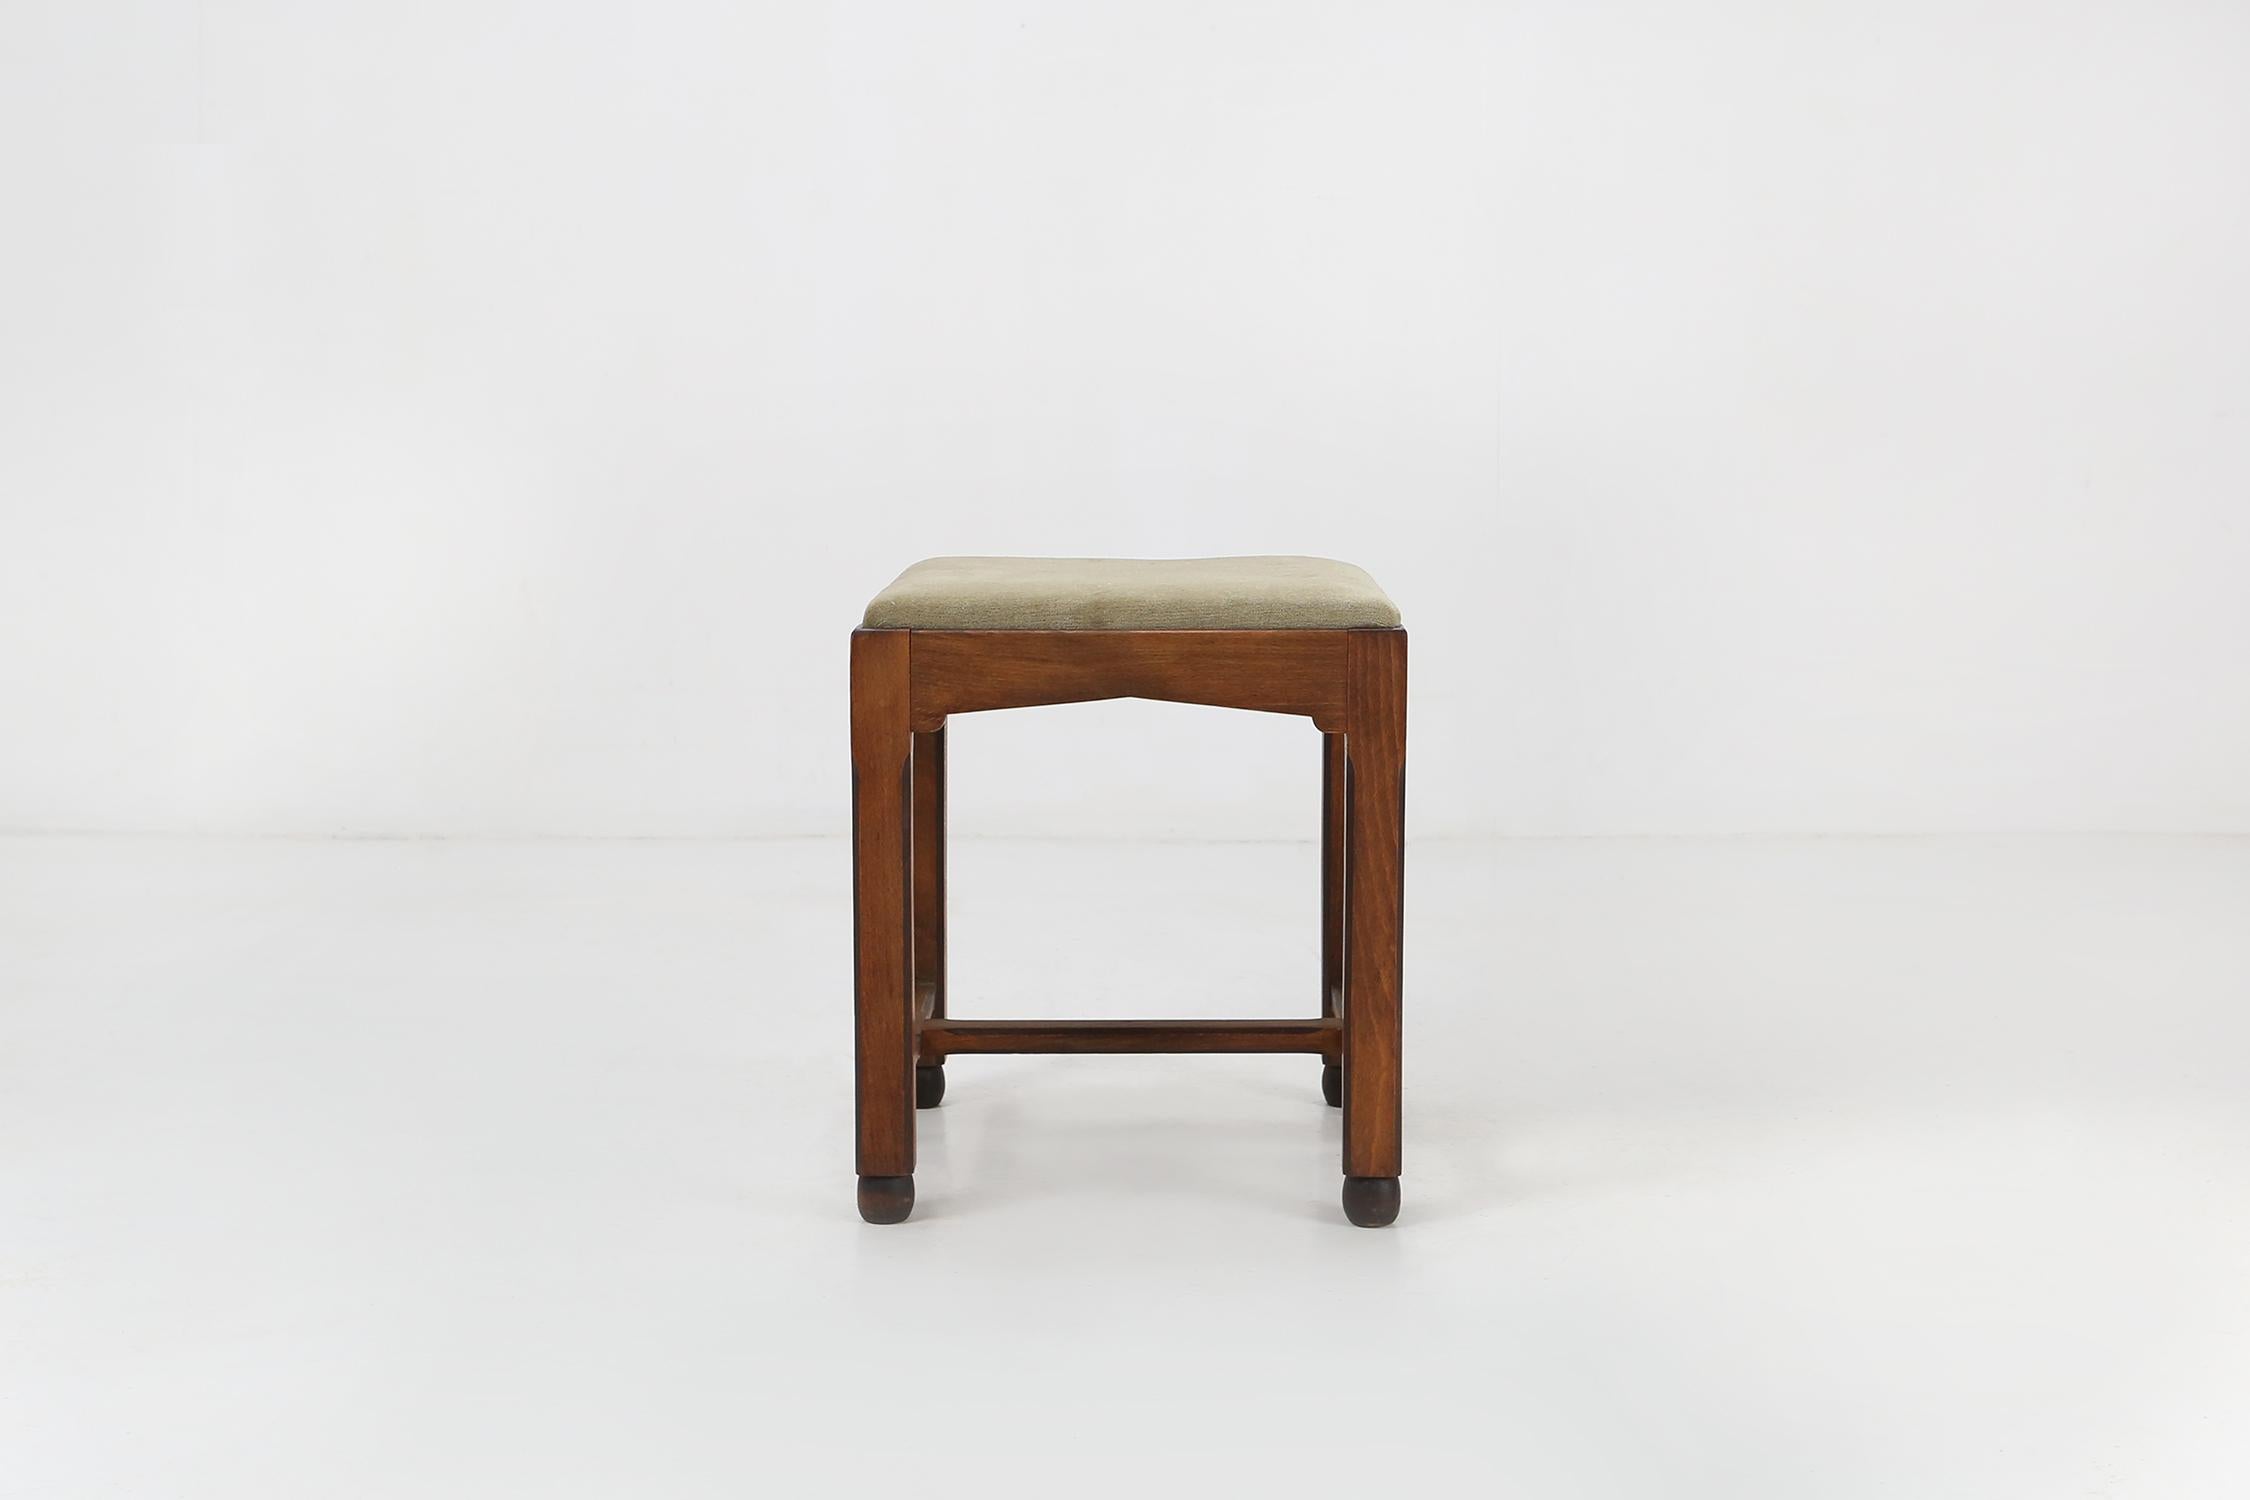 Art Deco stool in oak wood and velvet seat.
Can be used as foot stool or as stool.